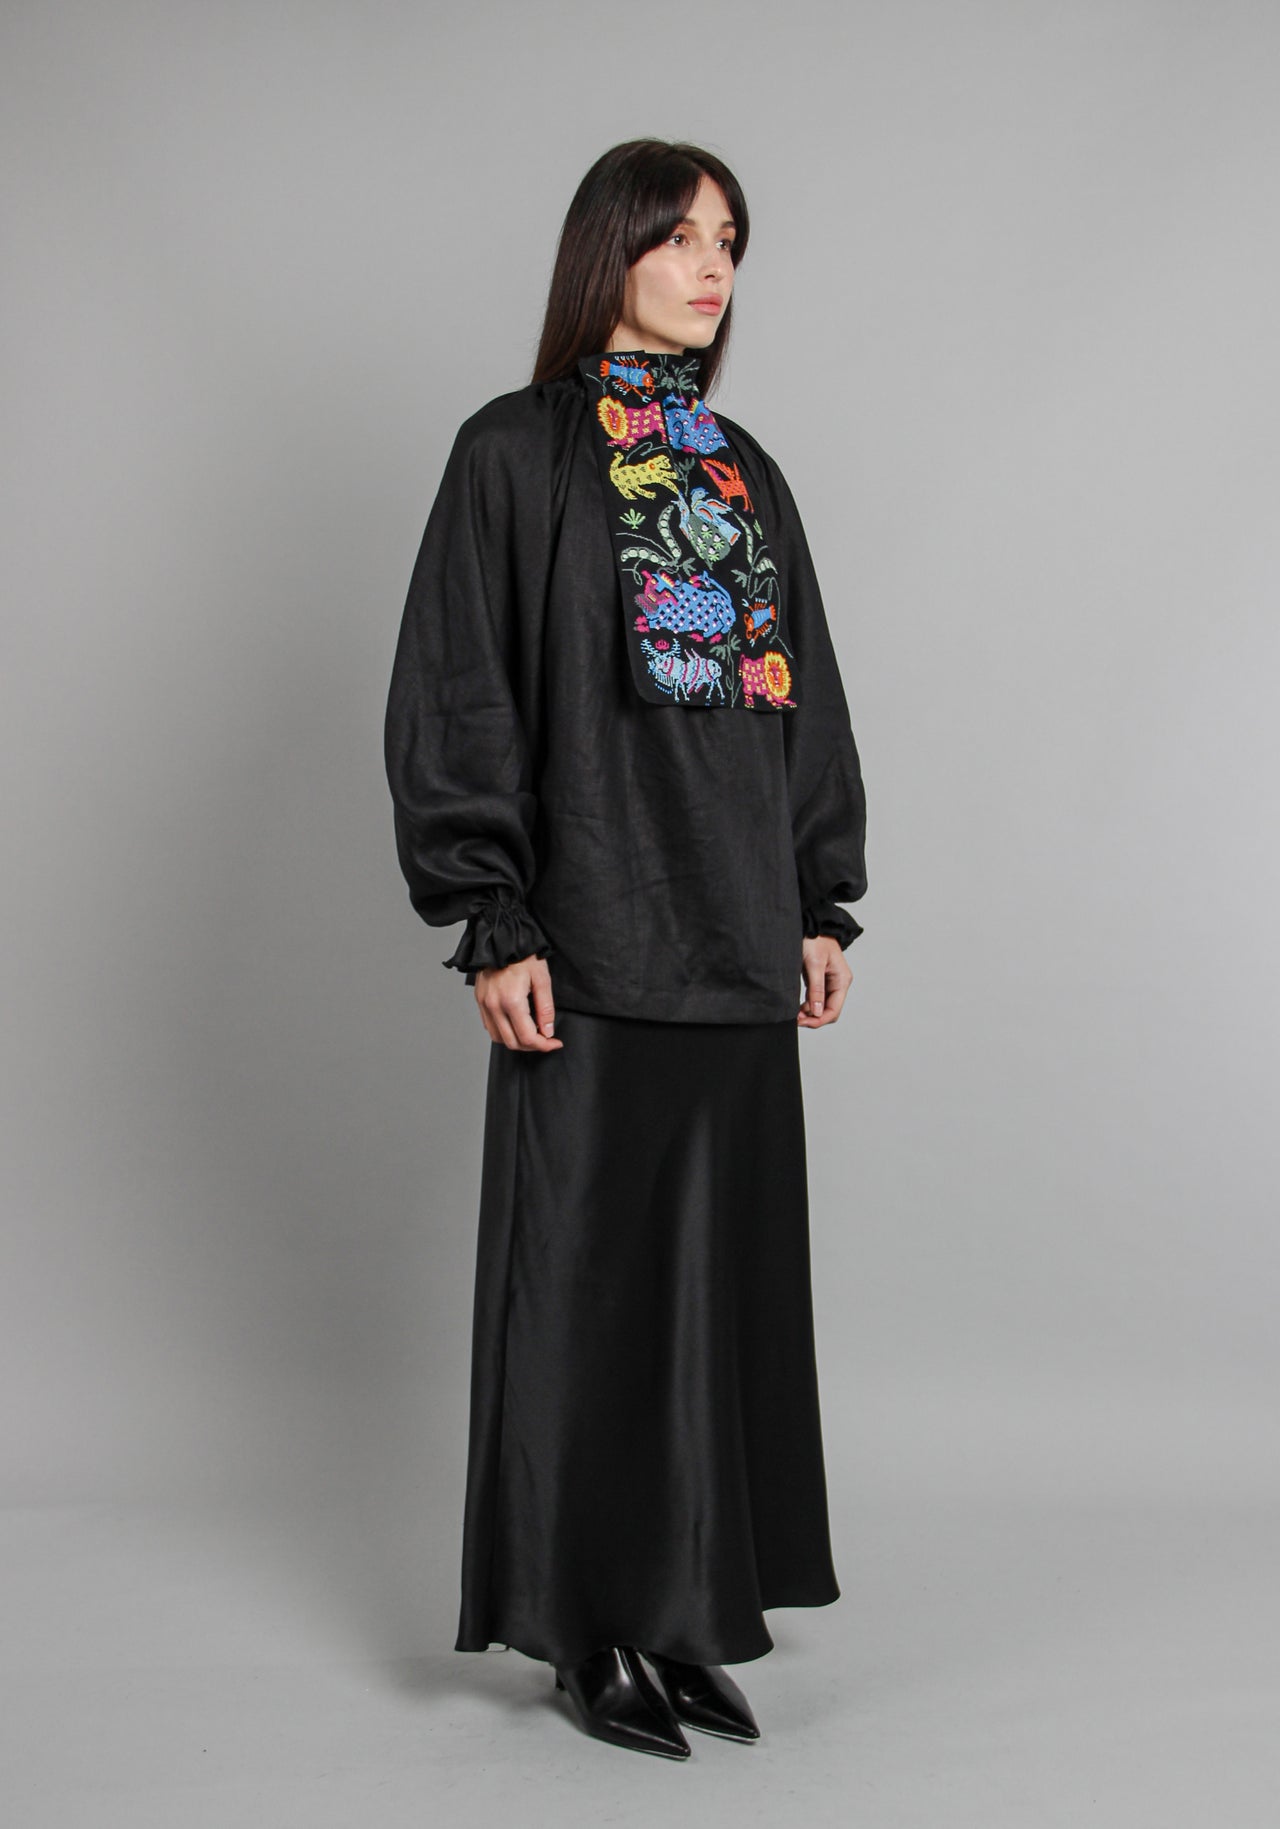 Long sleeve shirt with high neck embroidered element